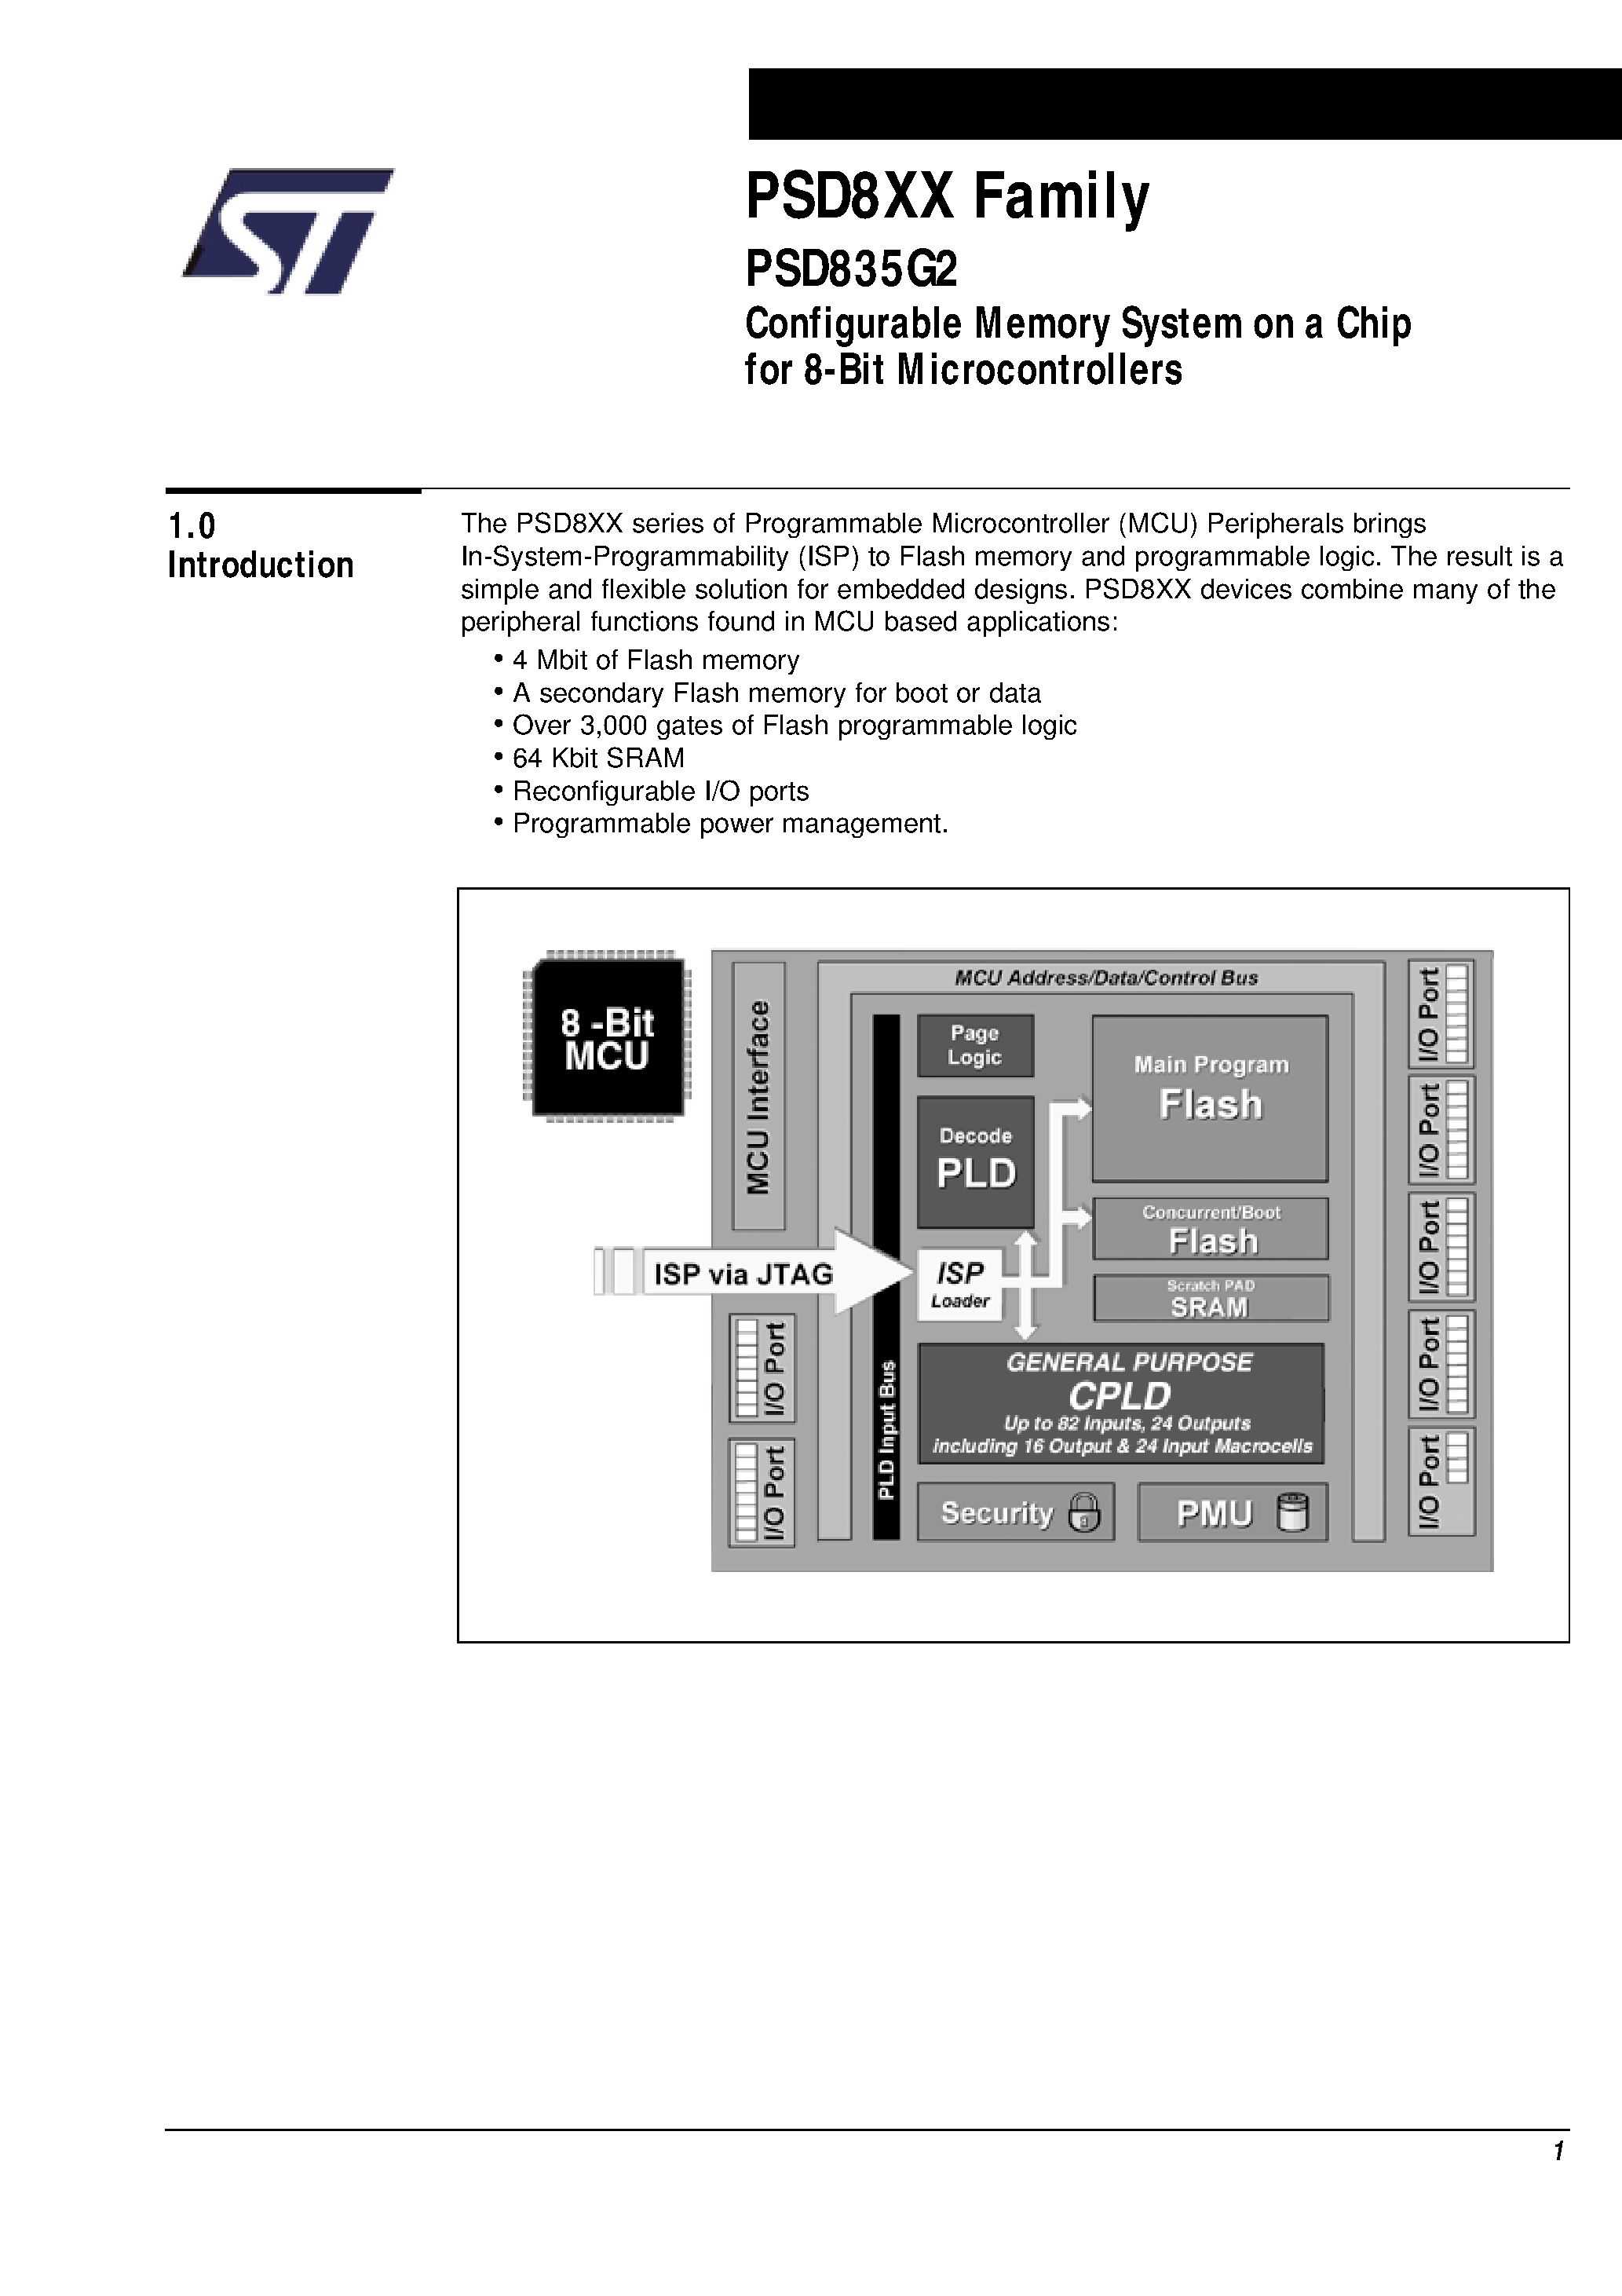 Datasheet PSD835F2-A-70JI - Configurable Memory System on a Chip for 8-Bit Microcontrollers page 2